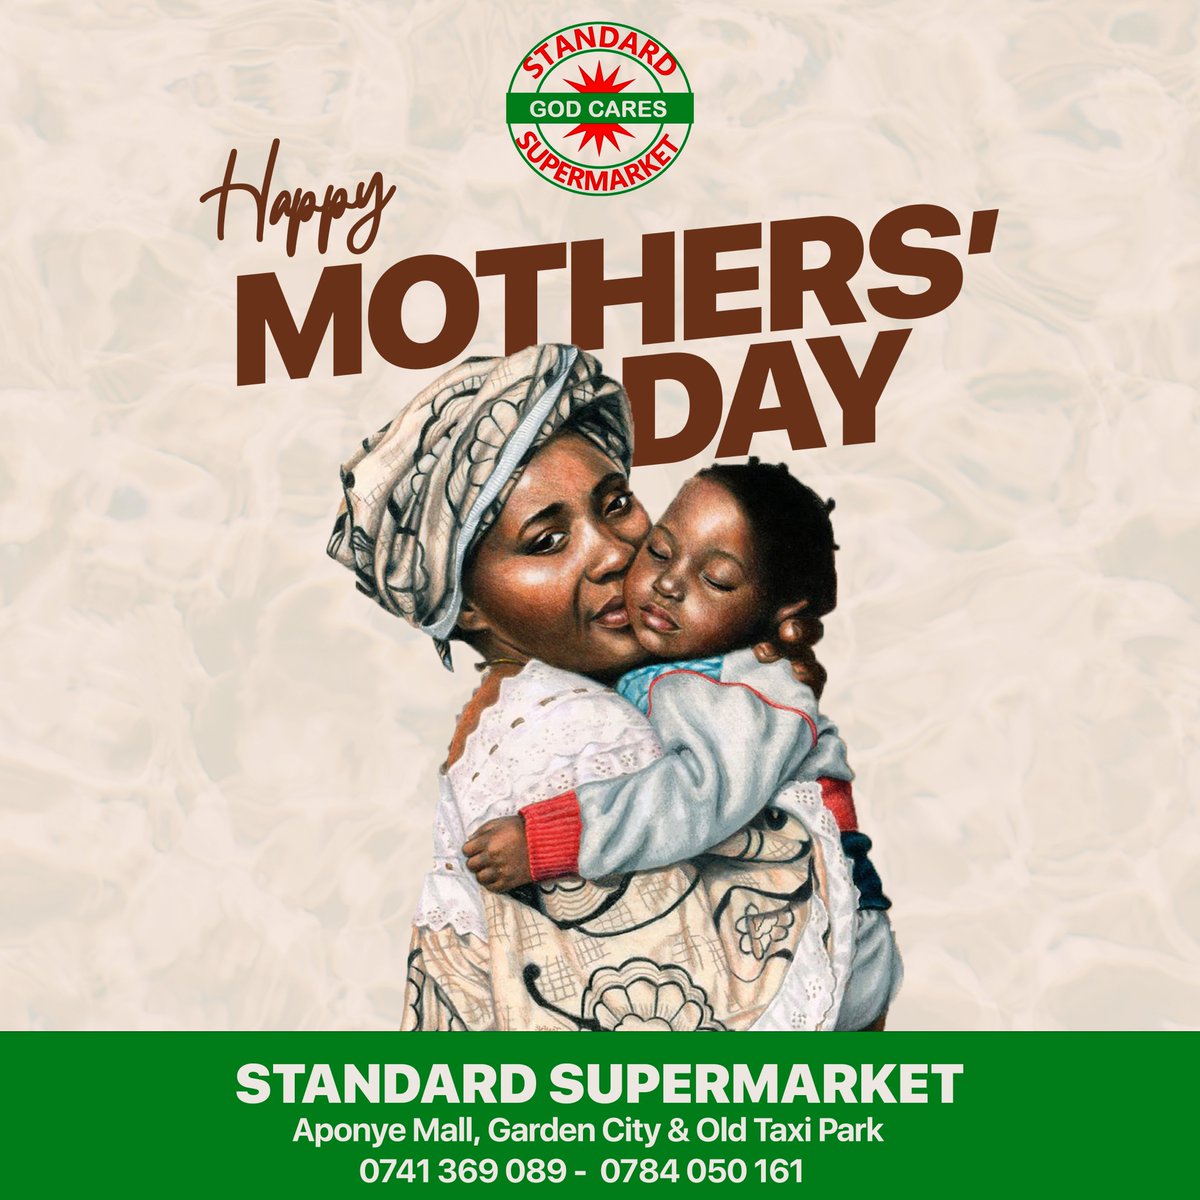 We would like to wish all the mothers out there a very happy day. Your Love has no equal